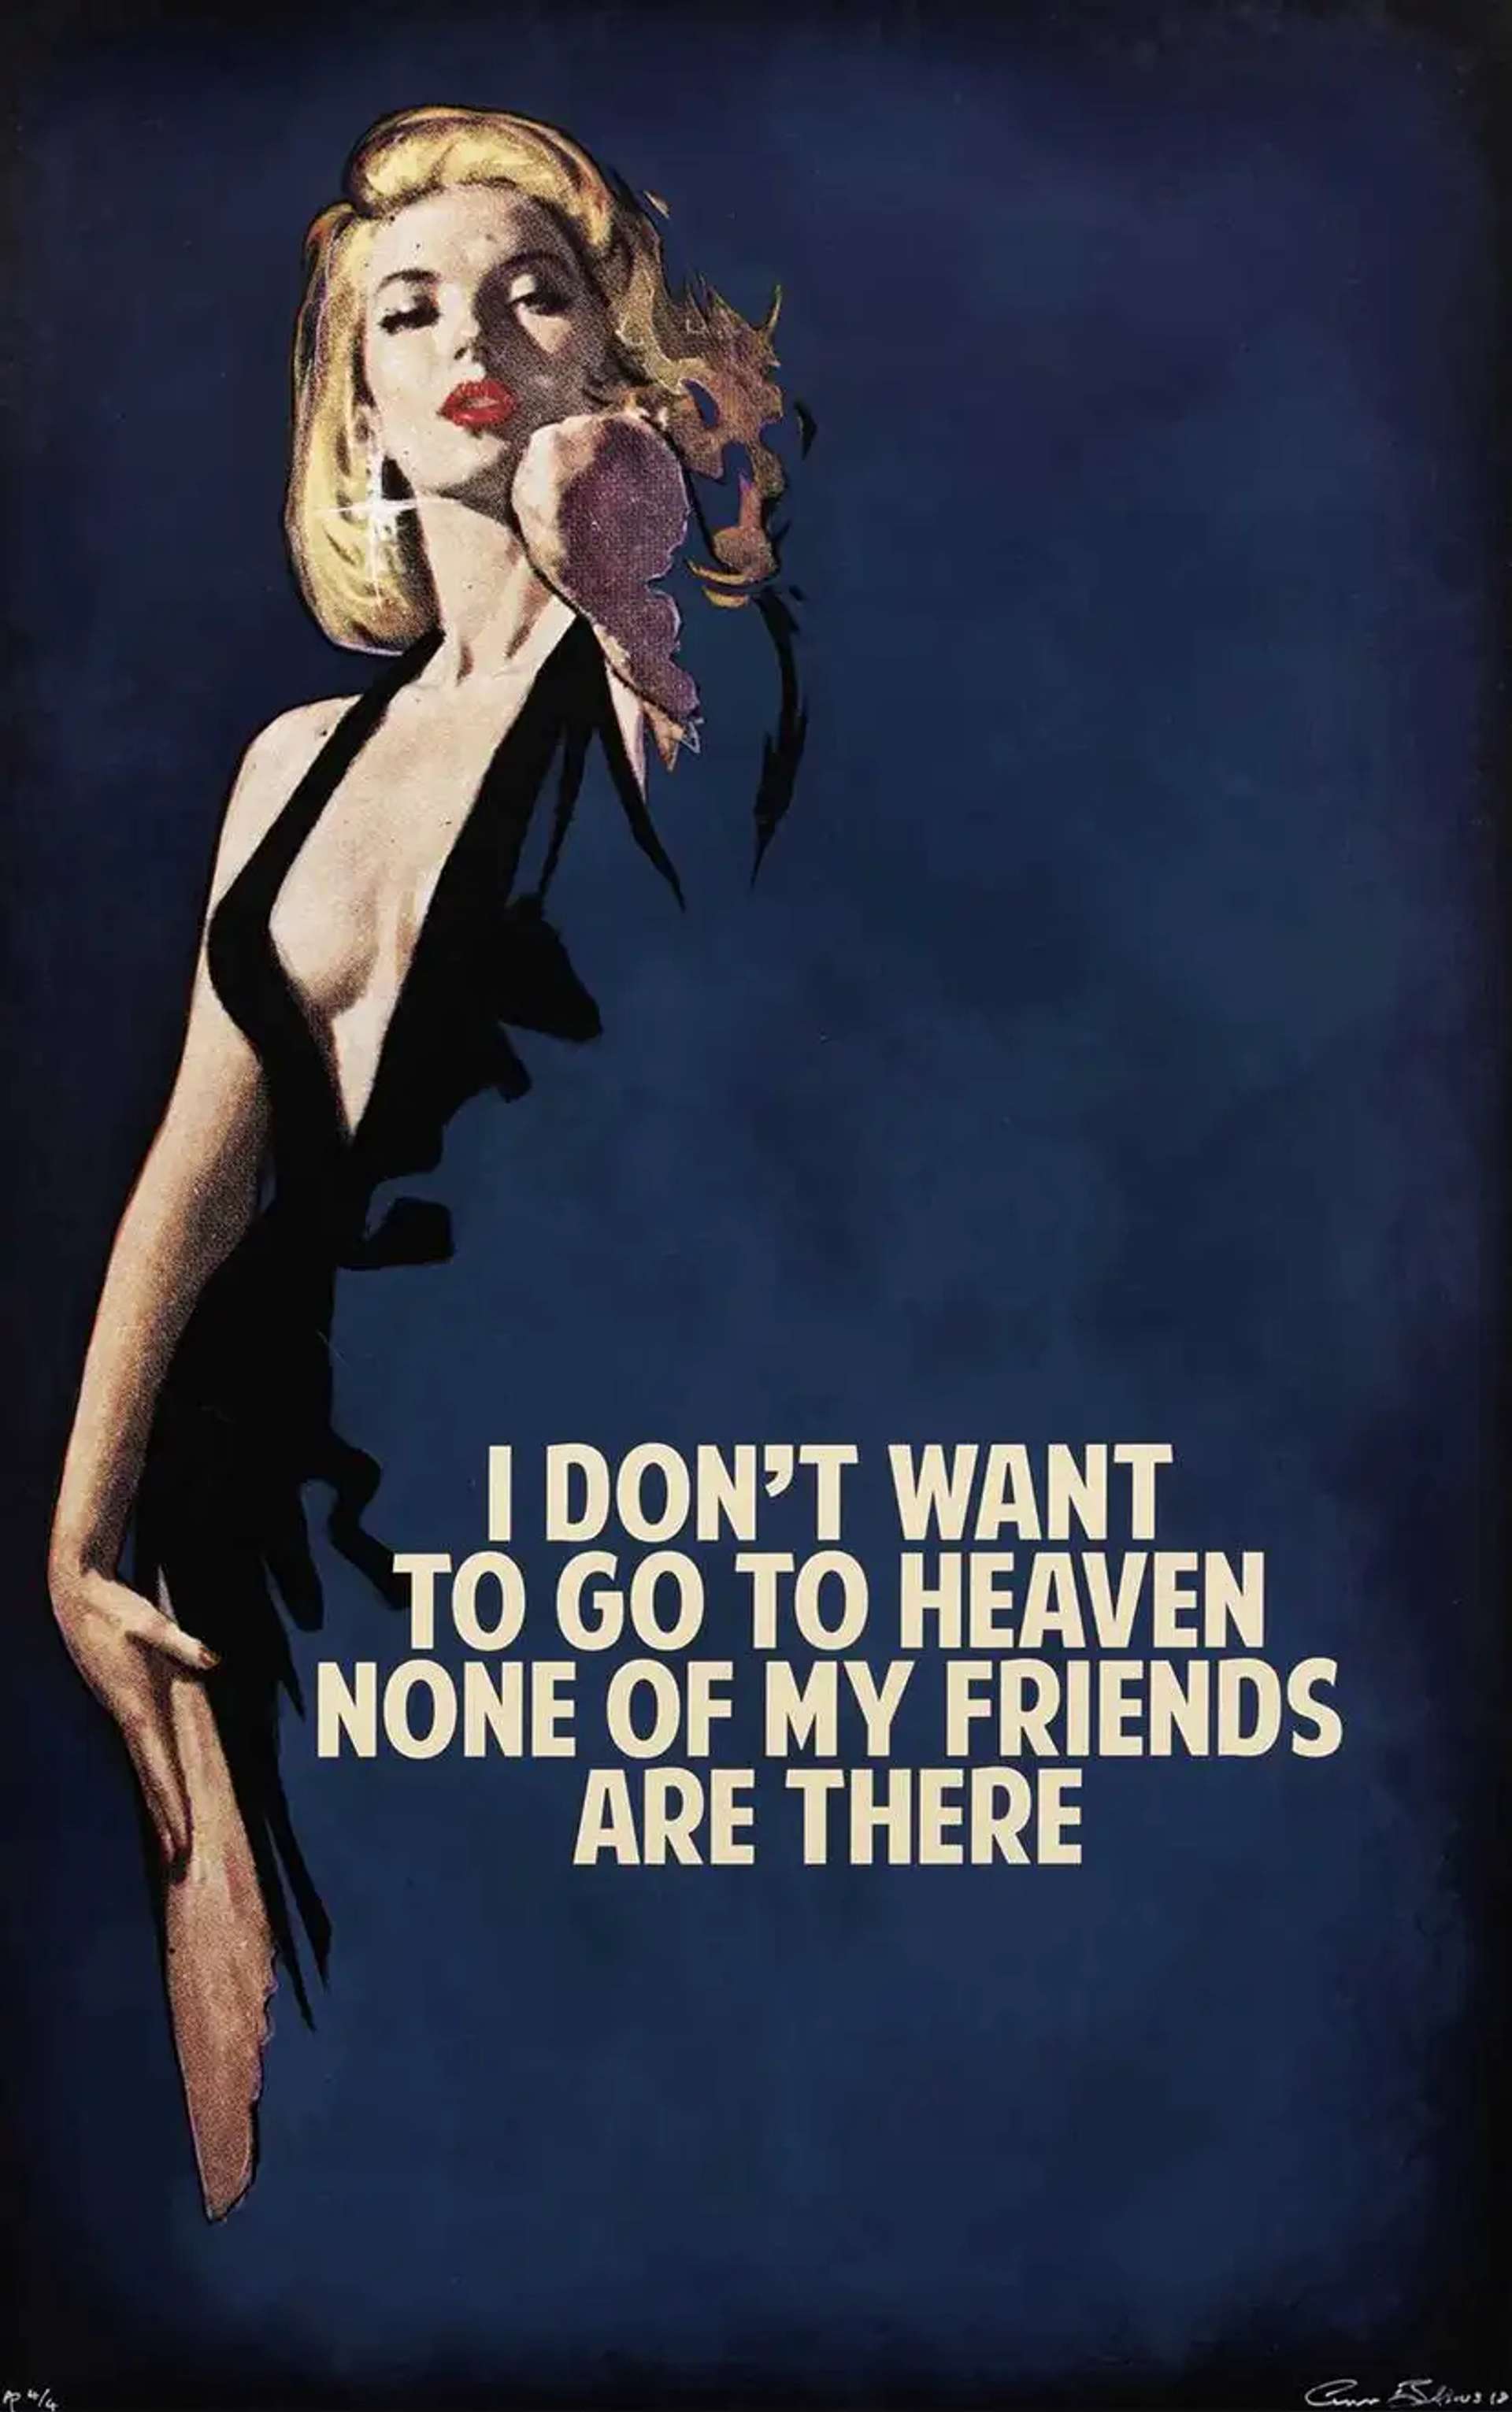 A screenprint artwork featuring a dark blue washed background. A cropped image of a blonde woman is depicted, wearing a sultry low-cut black dress. Her elbow is bent and one hand wraps behind the back of her own neck. At the bottom of the artwork, white capital letters spell out the phrase, "I DON'T WANT TO GO TO HEAVEN NONE OF MY FRIENDS ARE THERE."